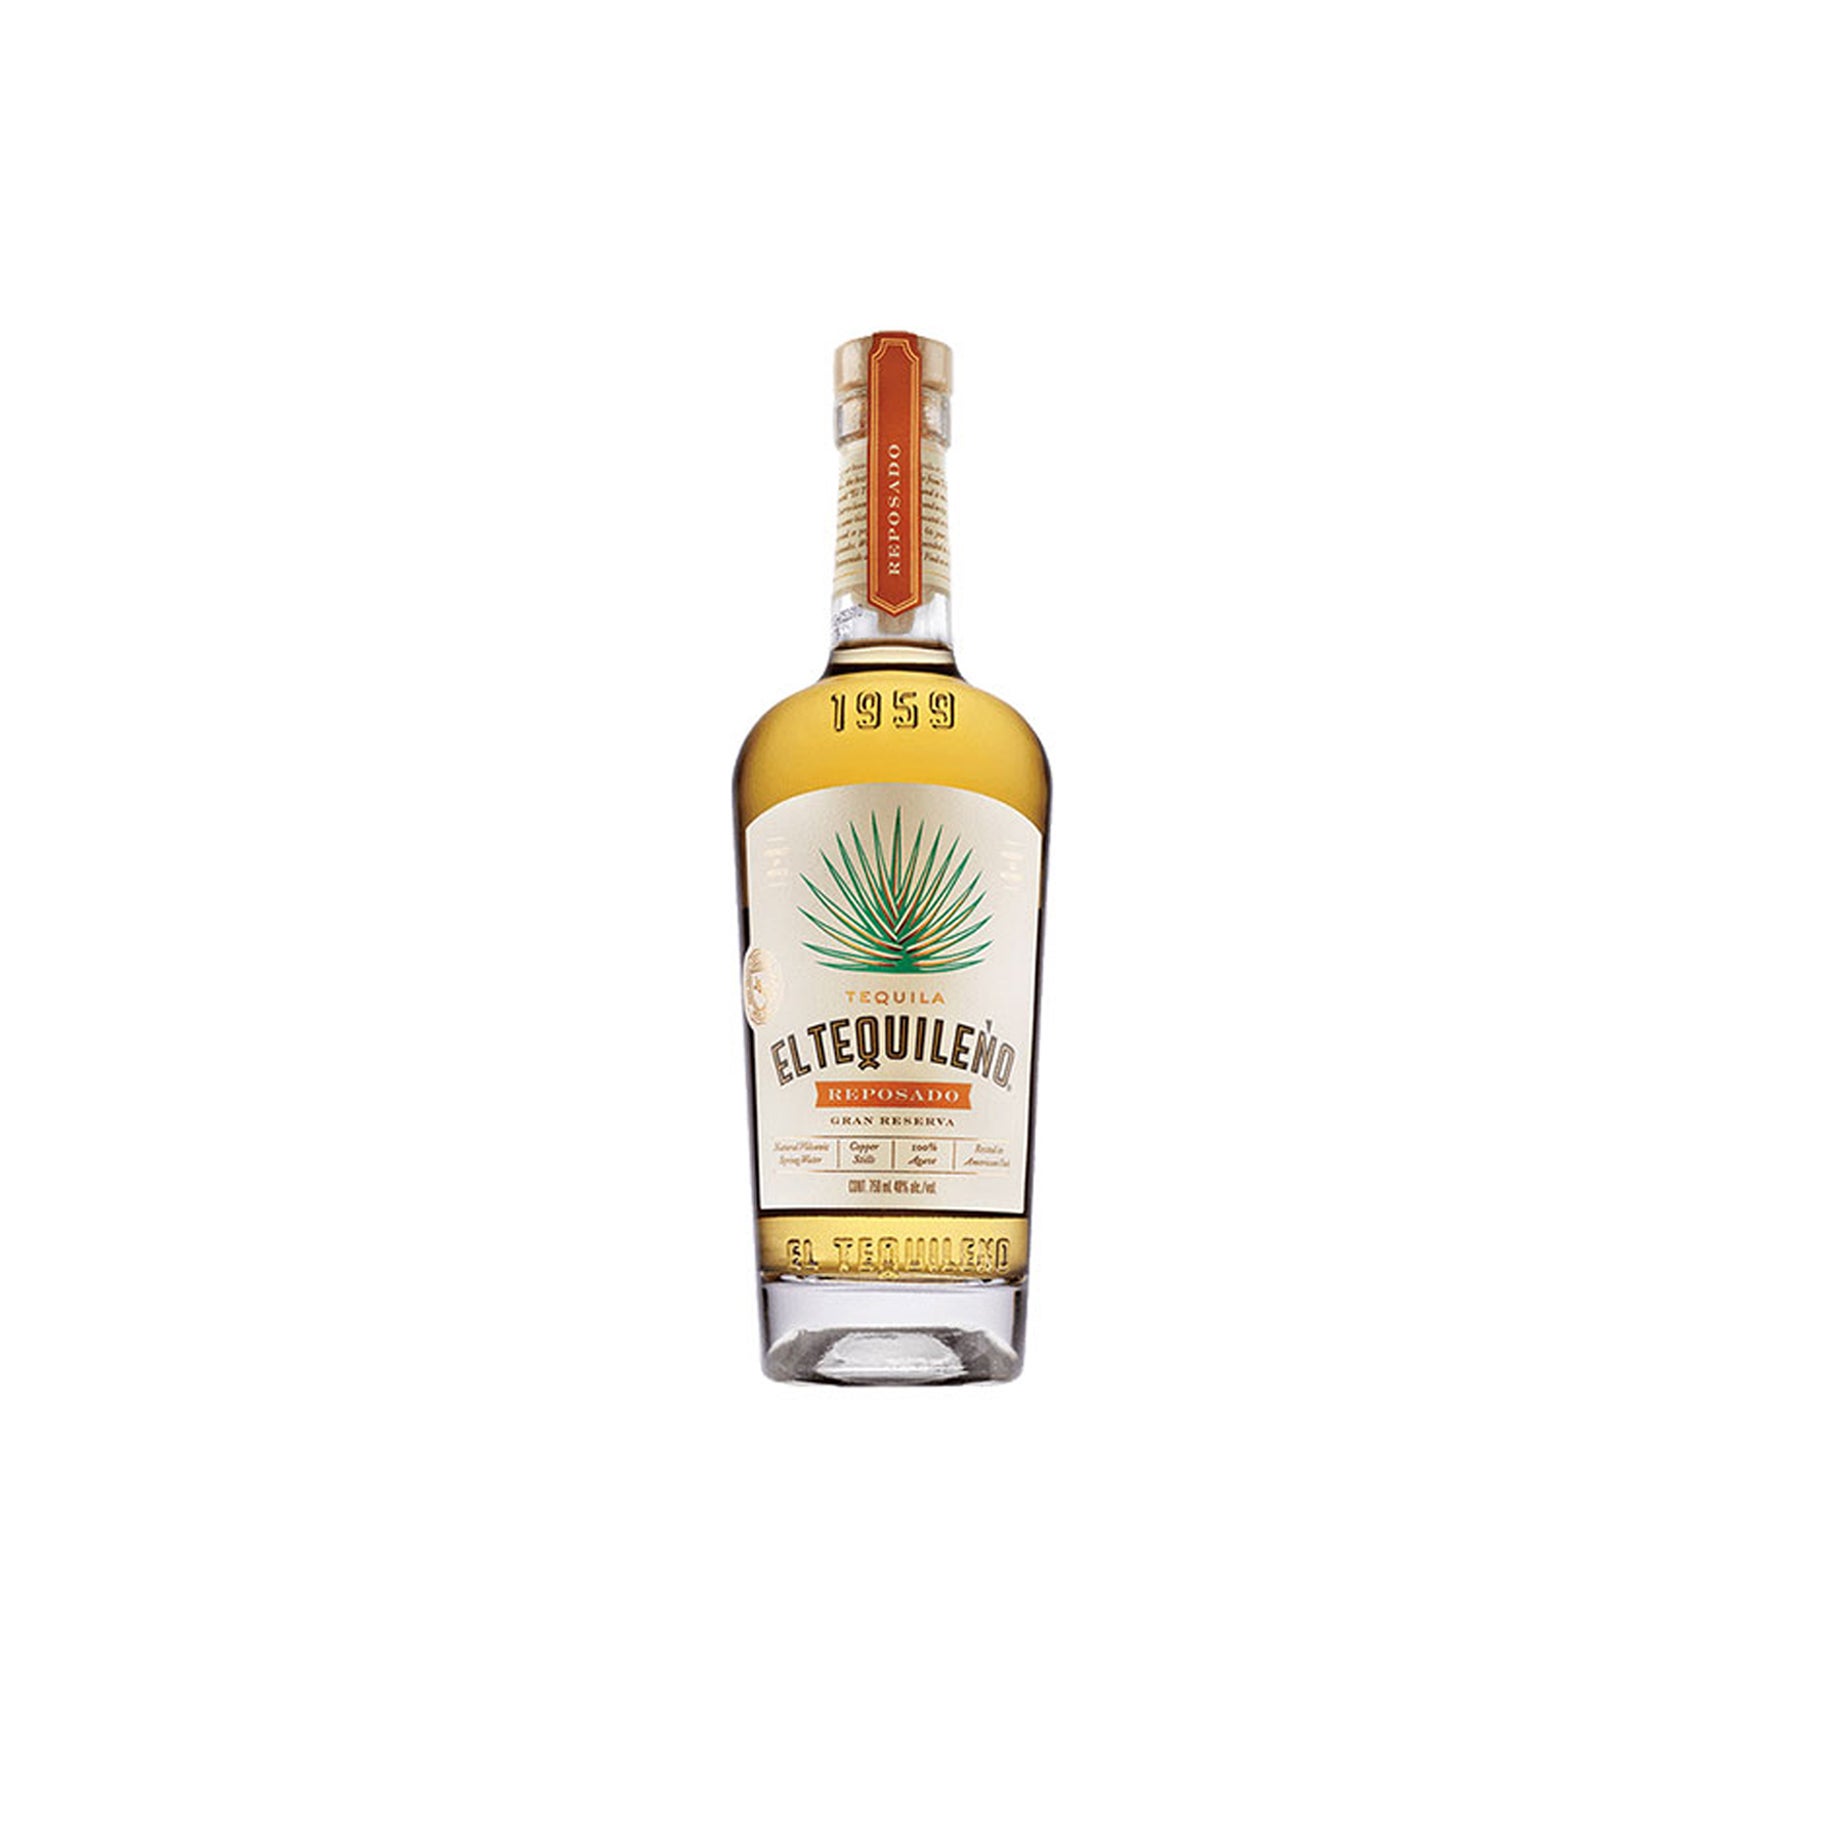 The Best Sipping Tequila Option: Tequila El Tequileño Reposado Gran Reserva